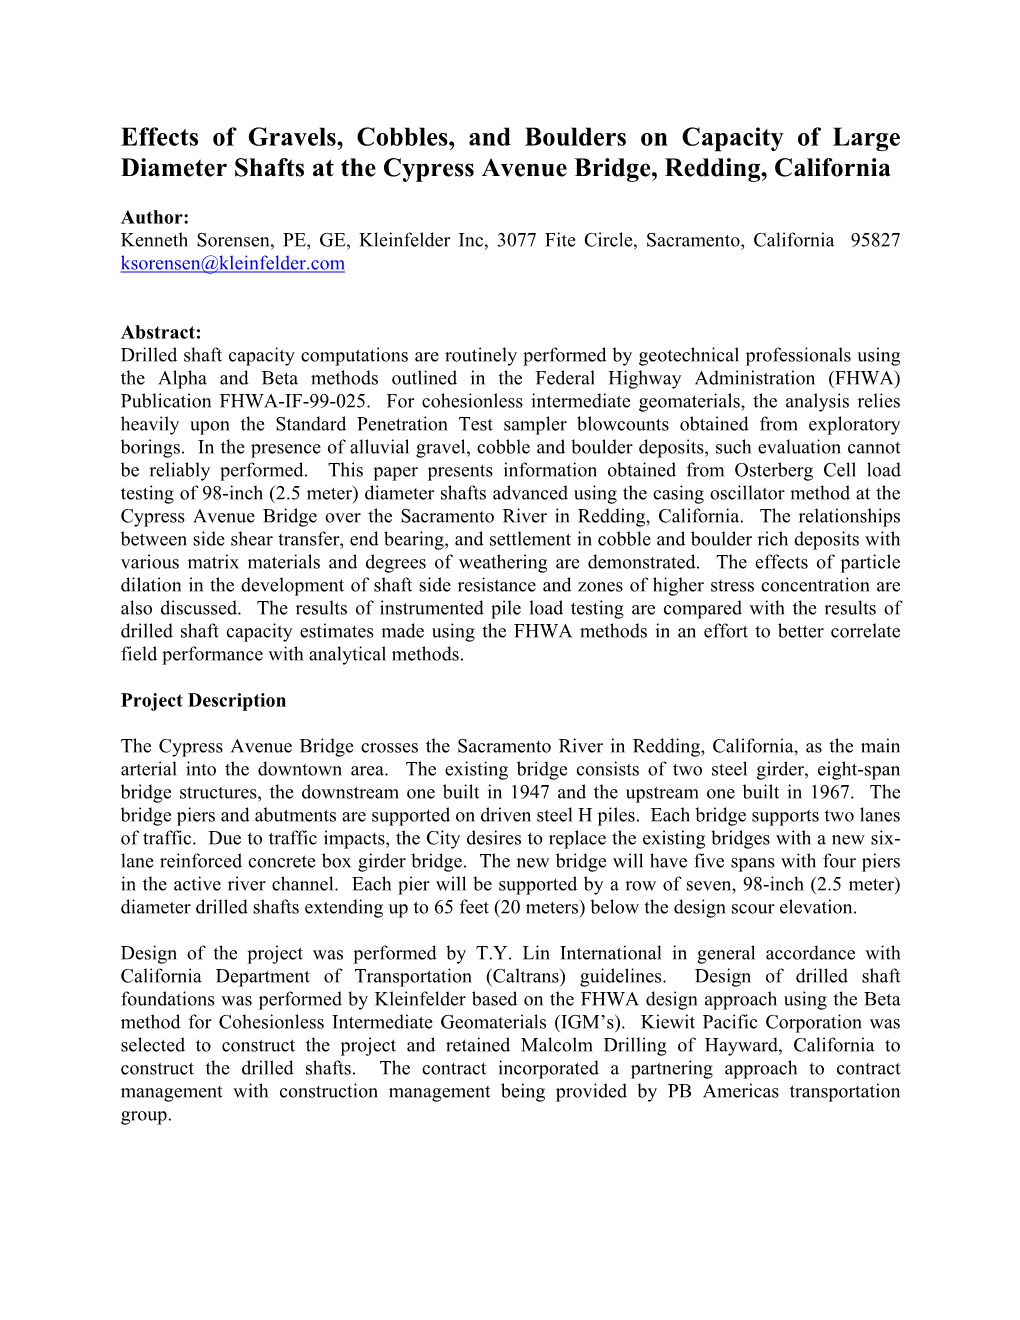 Effects of Gravels, Cobbles, and Boulders on Capacity of Large Diameter Shafts at the Cypress Avenue Bridge, Redding, California